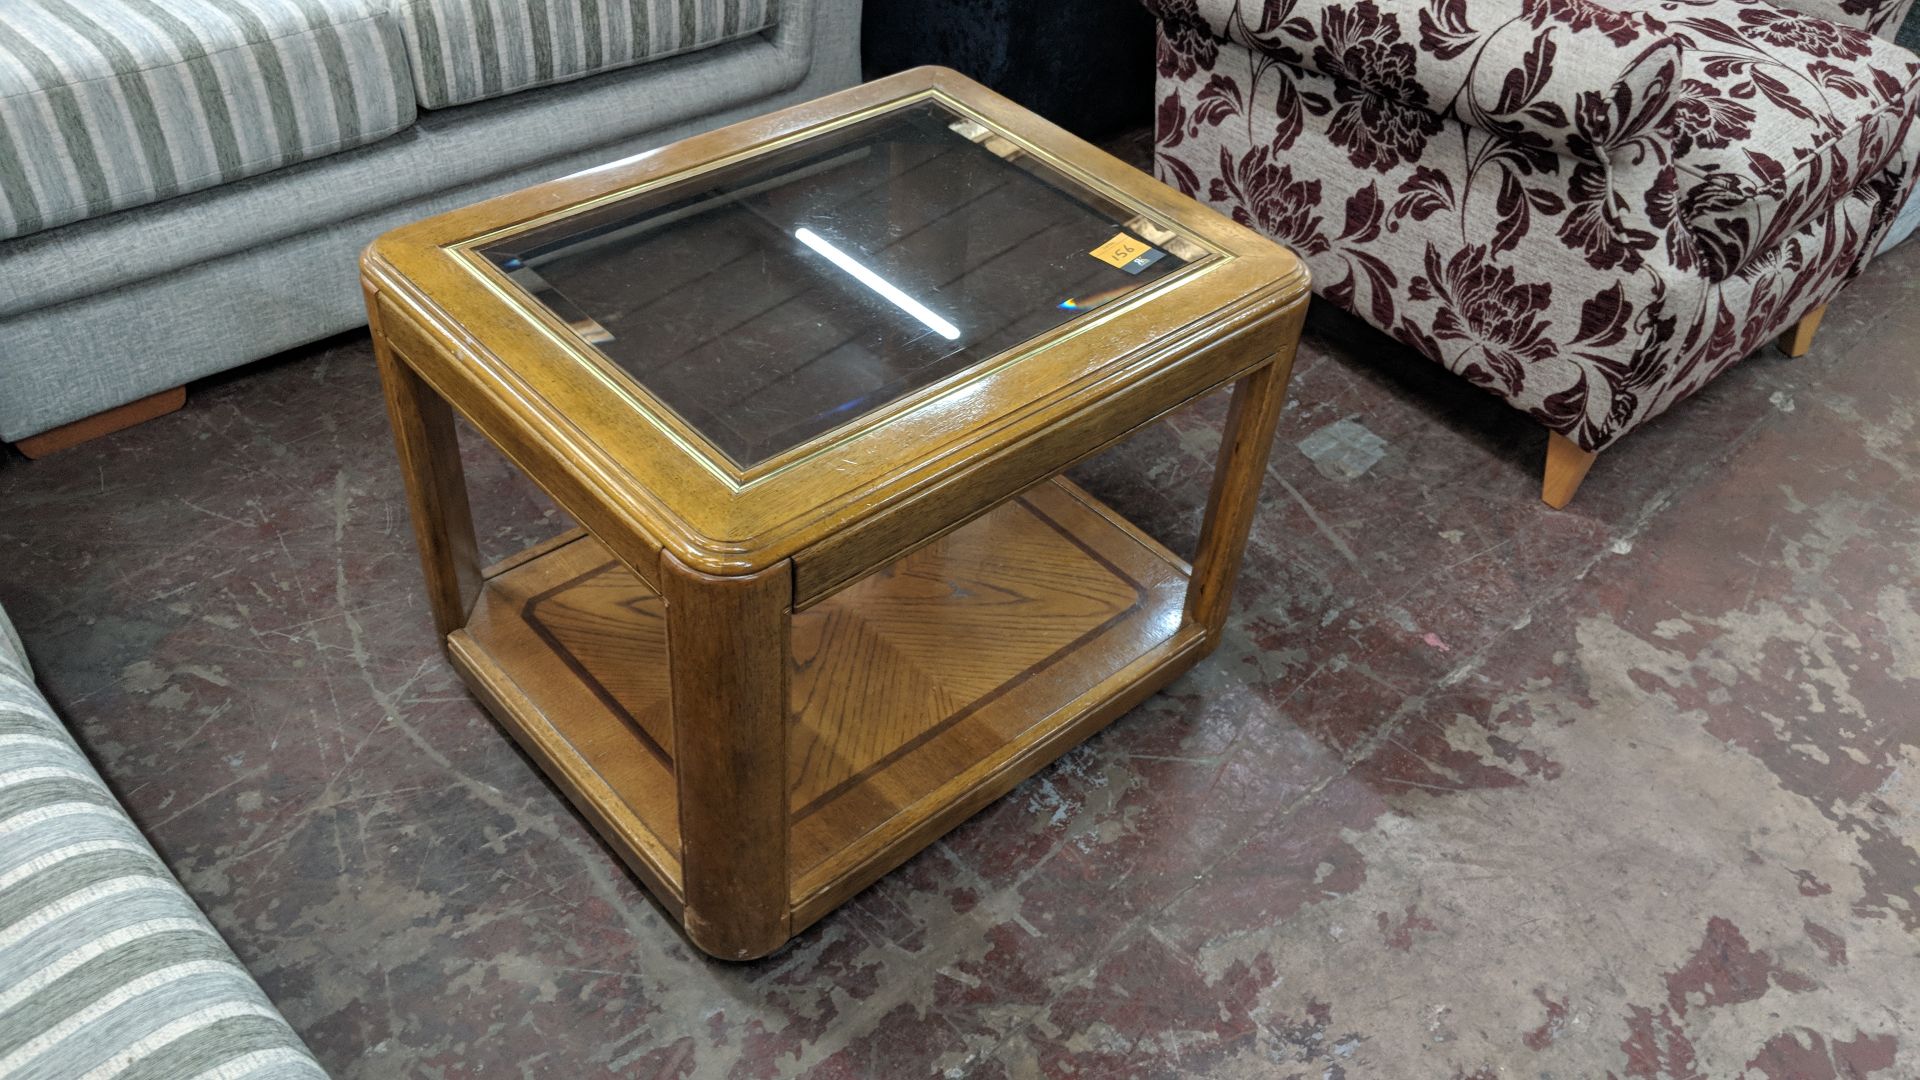 Occasional table with wooden shelf below & bevelled glass top, circa 700mm x 550mm IMPORTANT: Please